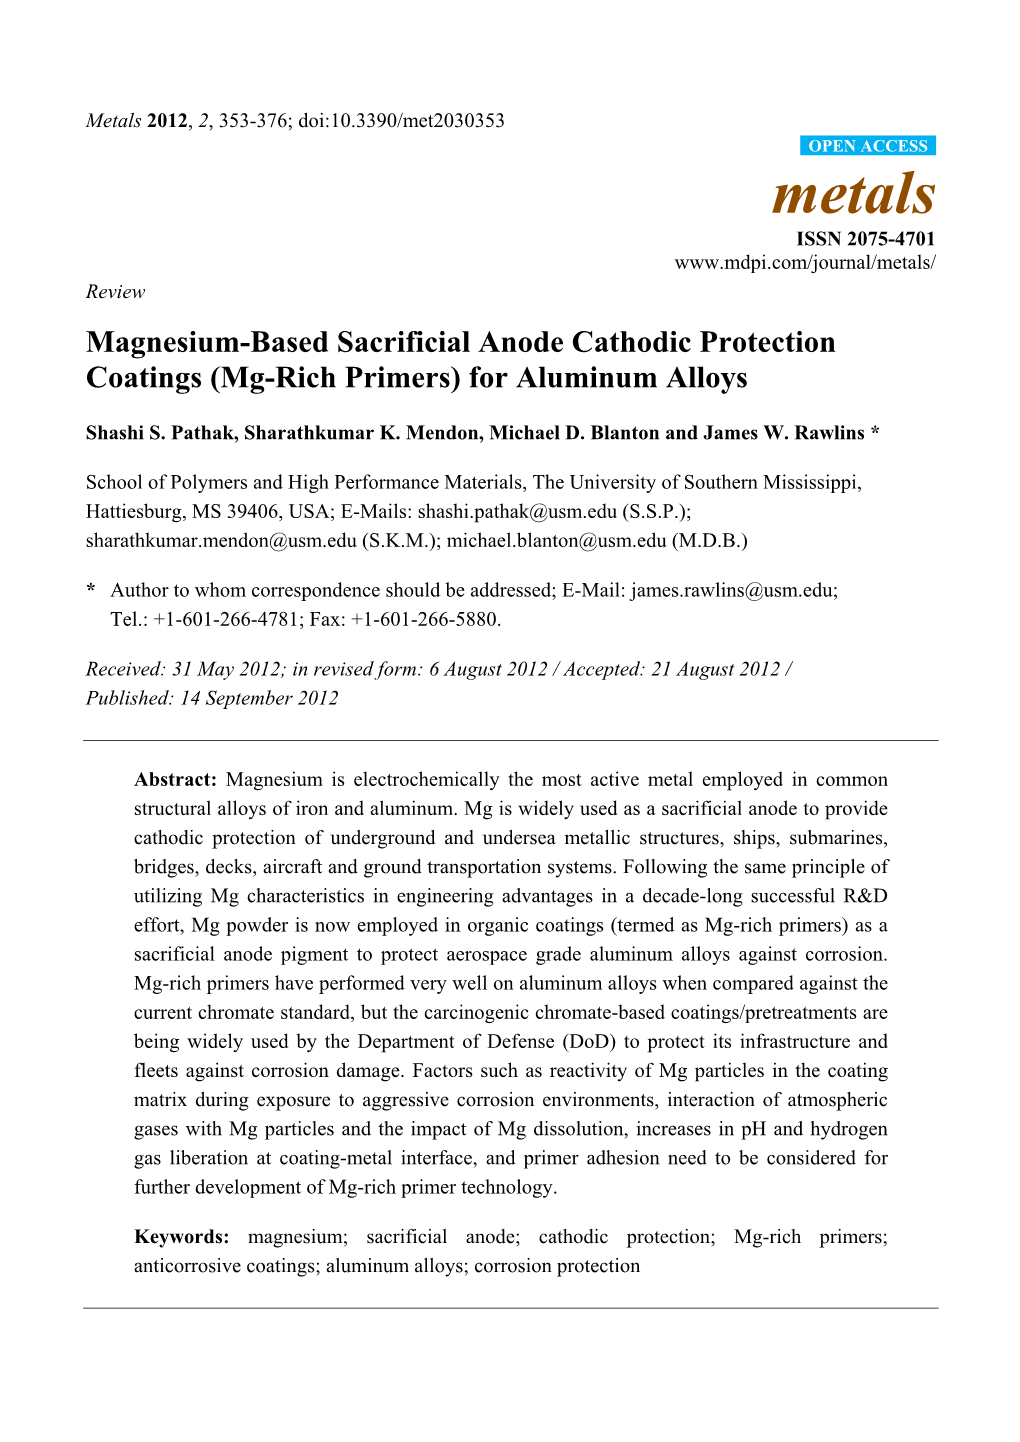 Magnesium-Based Sacrificial Anode Cathodic Protection Coatings (Mg-Rich Primers) for Aluminum Alloys